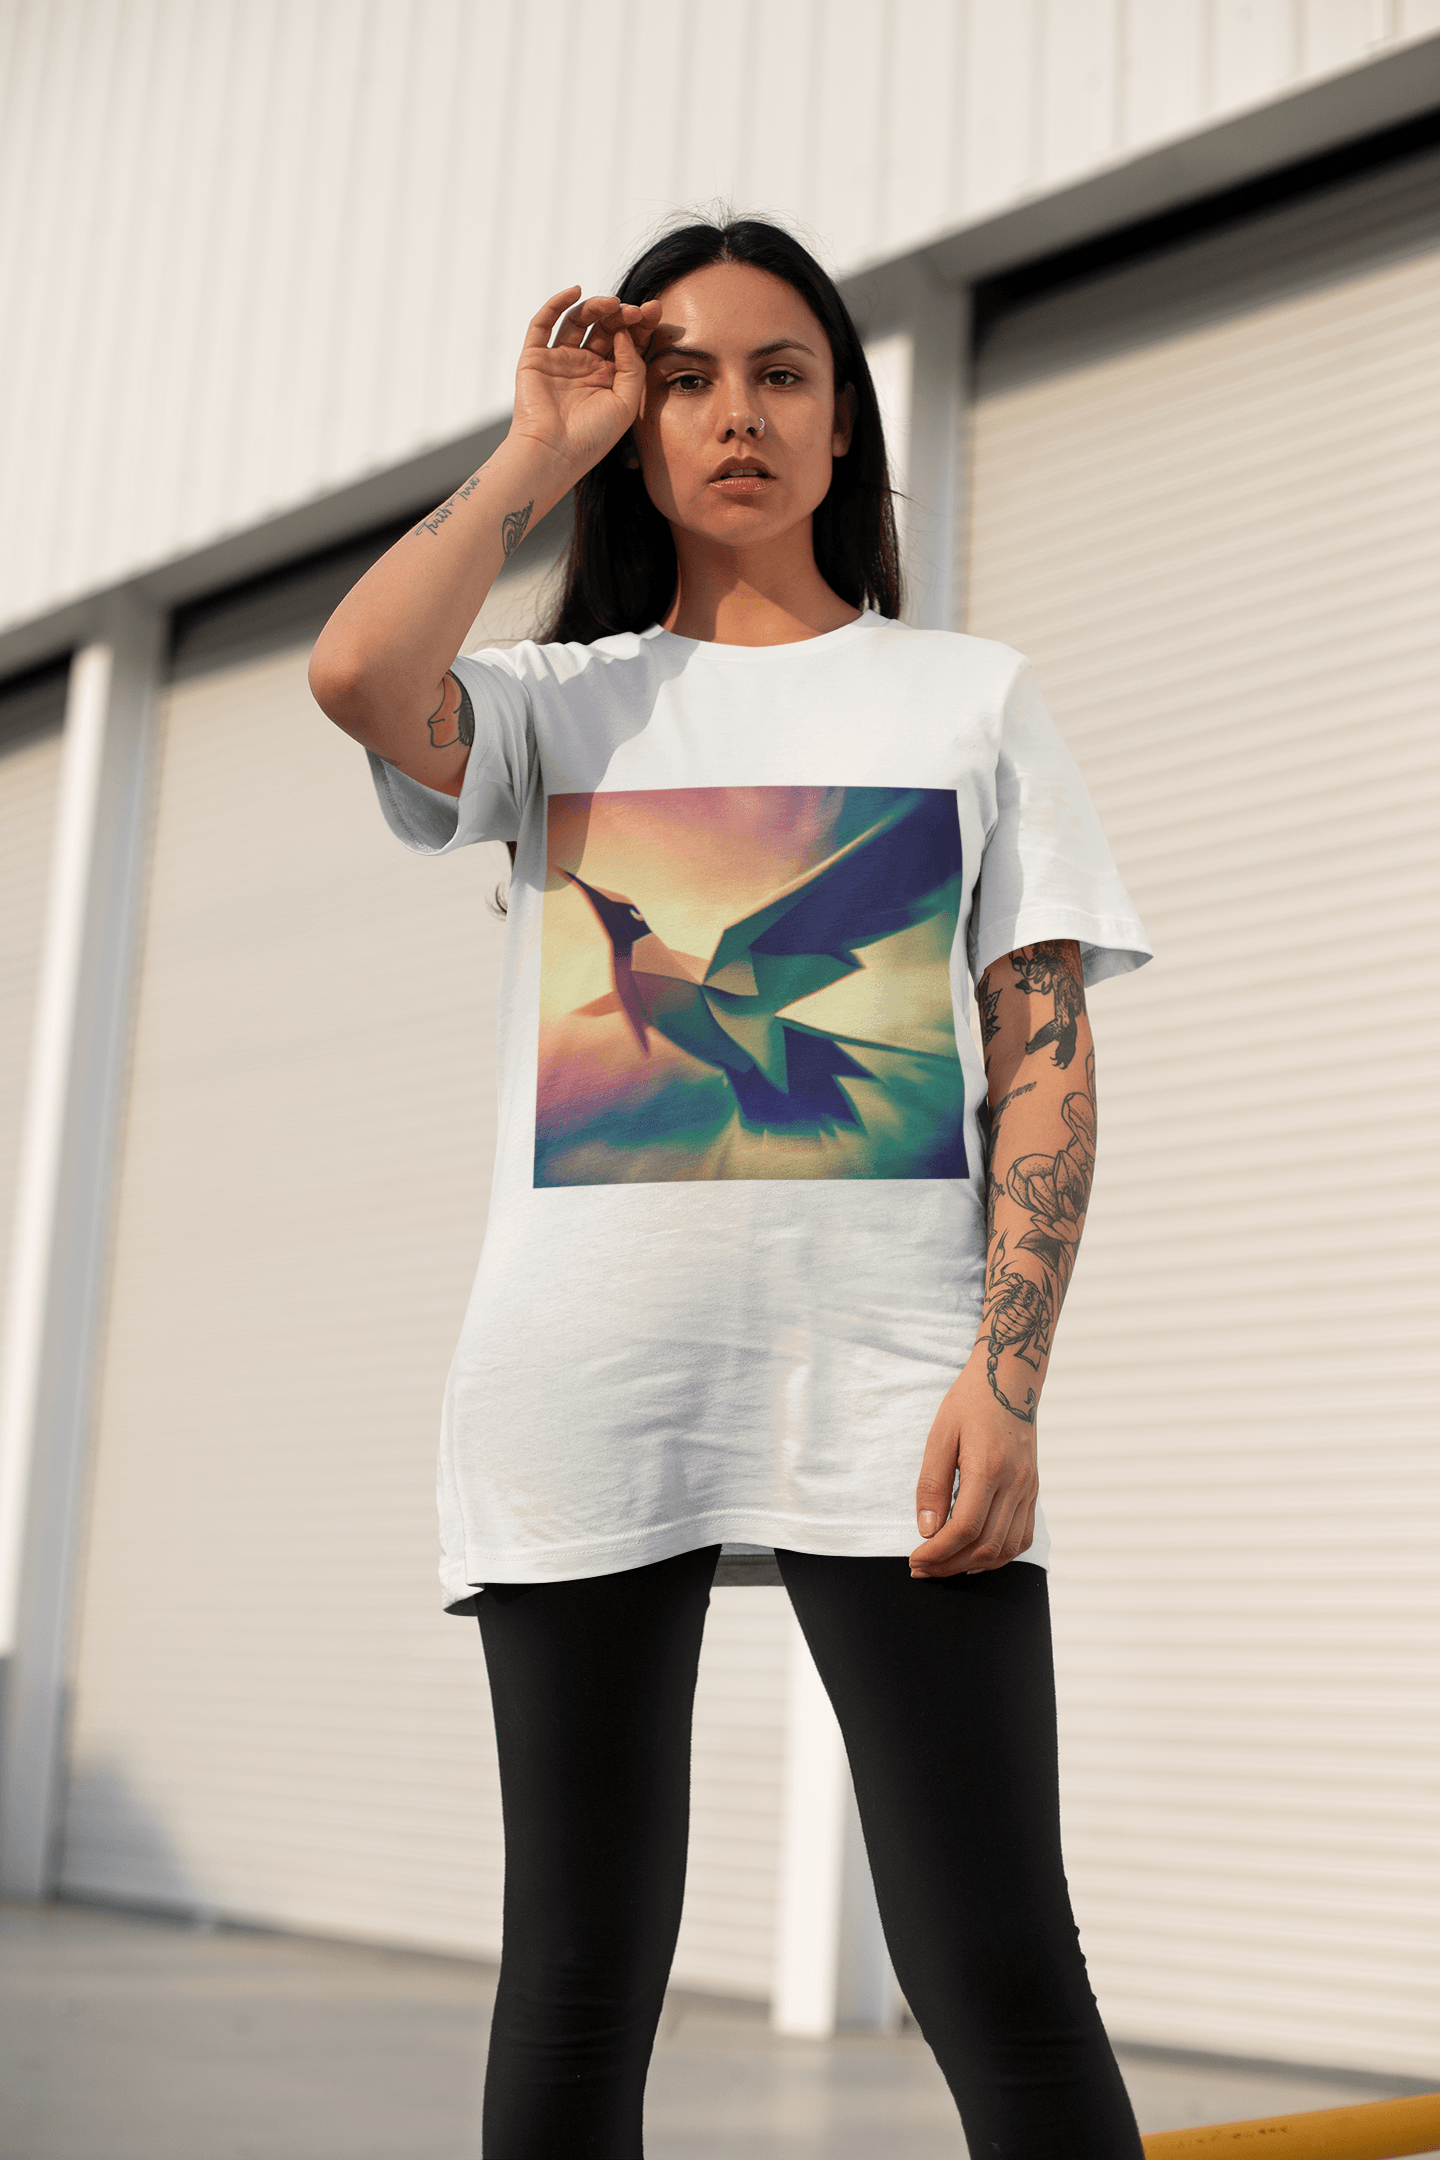 Wings of Beauty Baggy T-Shirt - The Accessorys Official